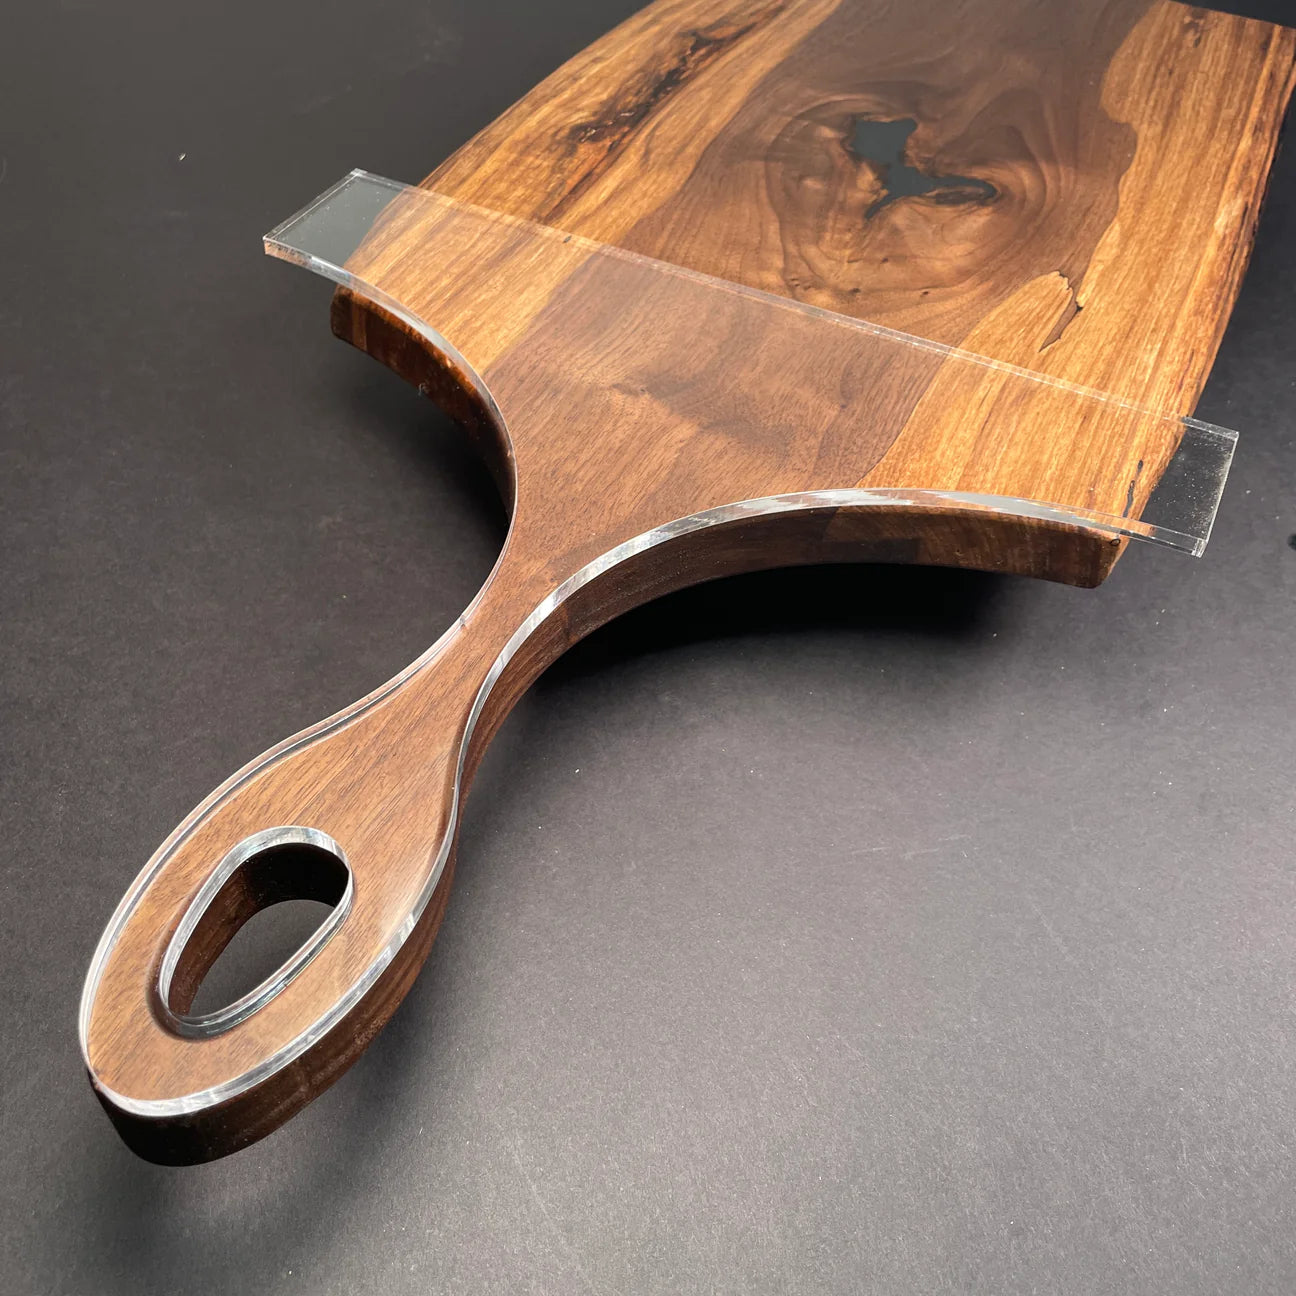 Charcuterie Board Handle Router Templates